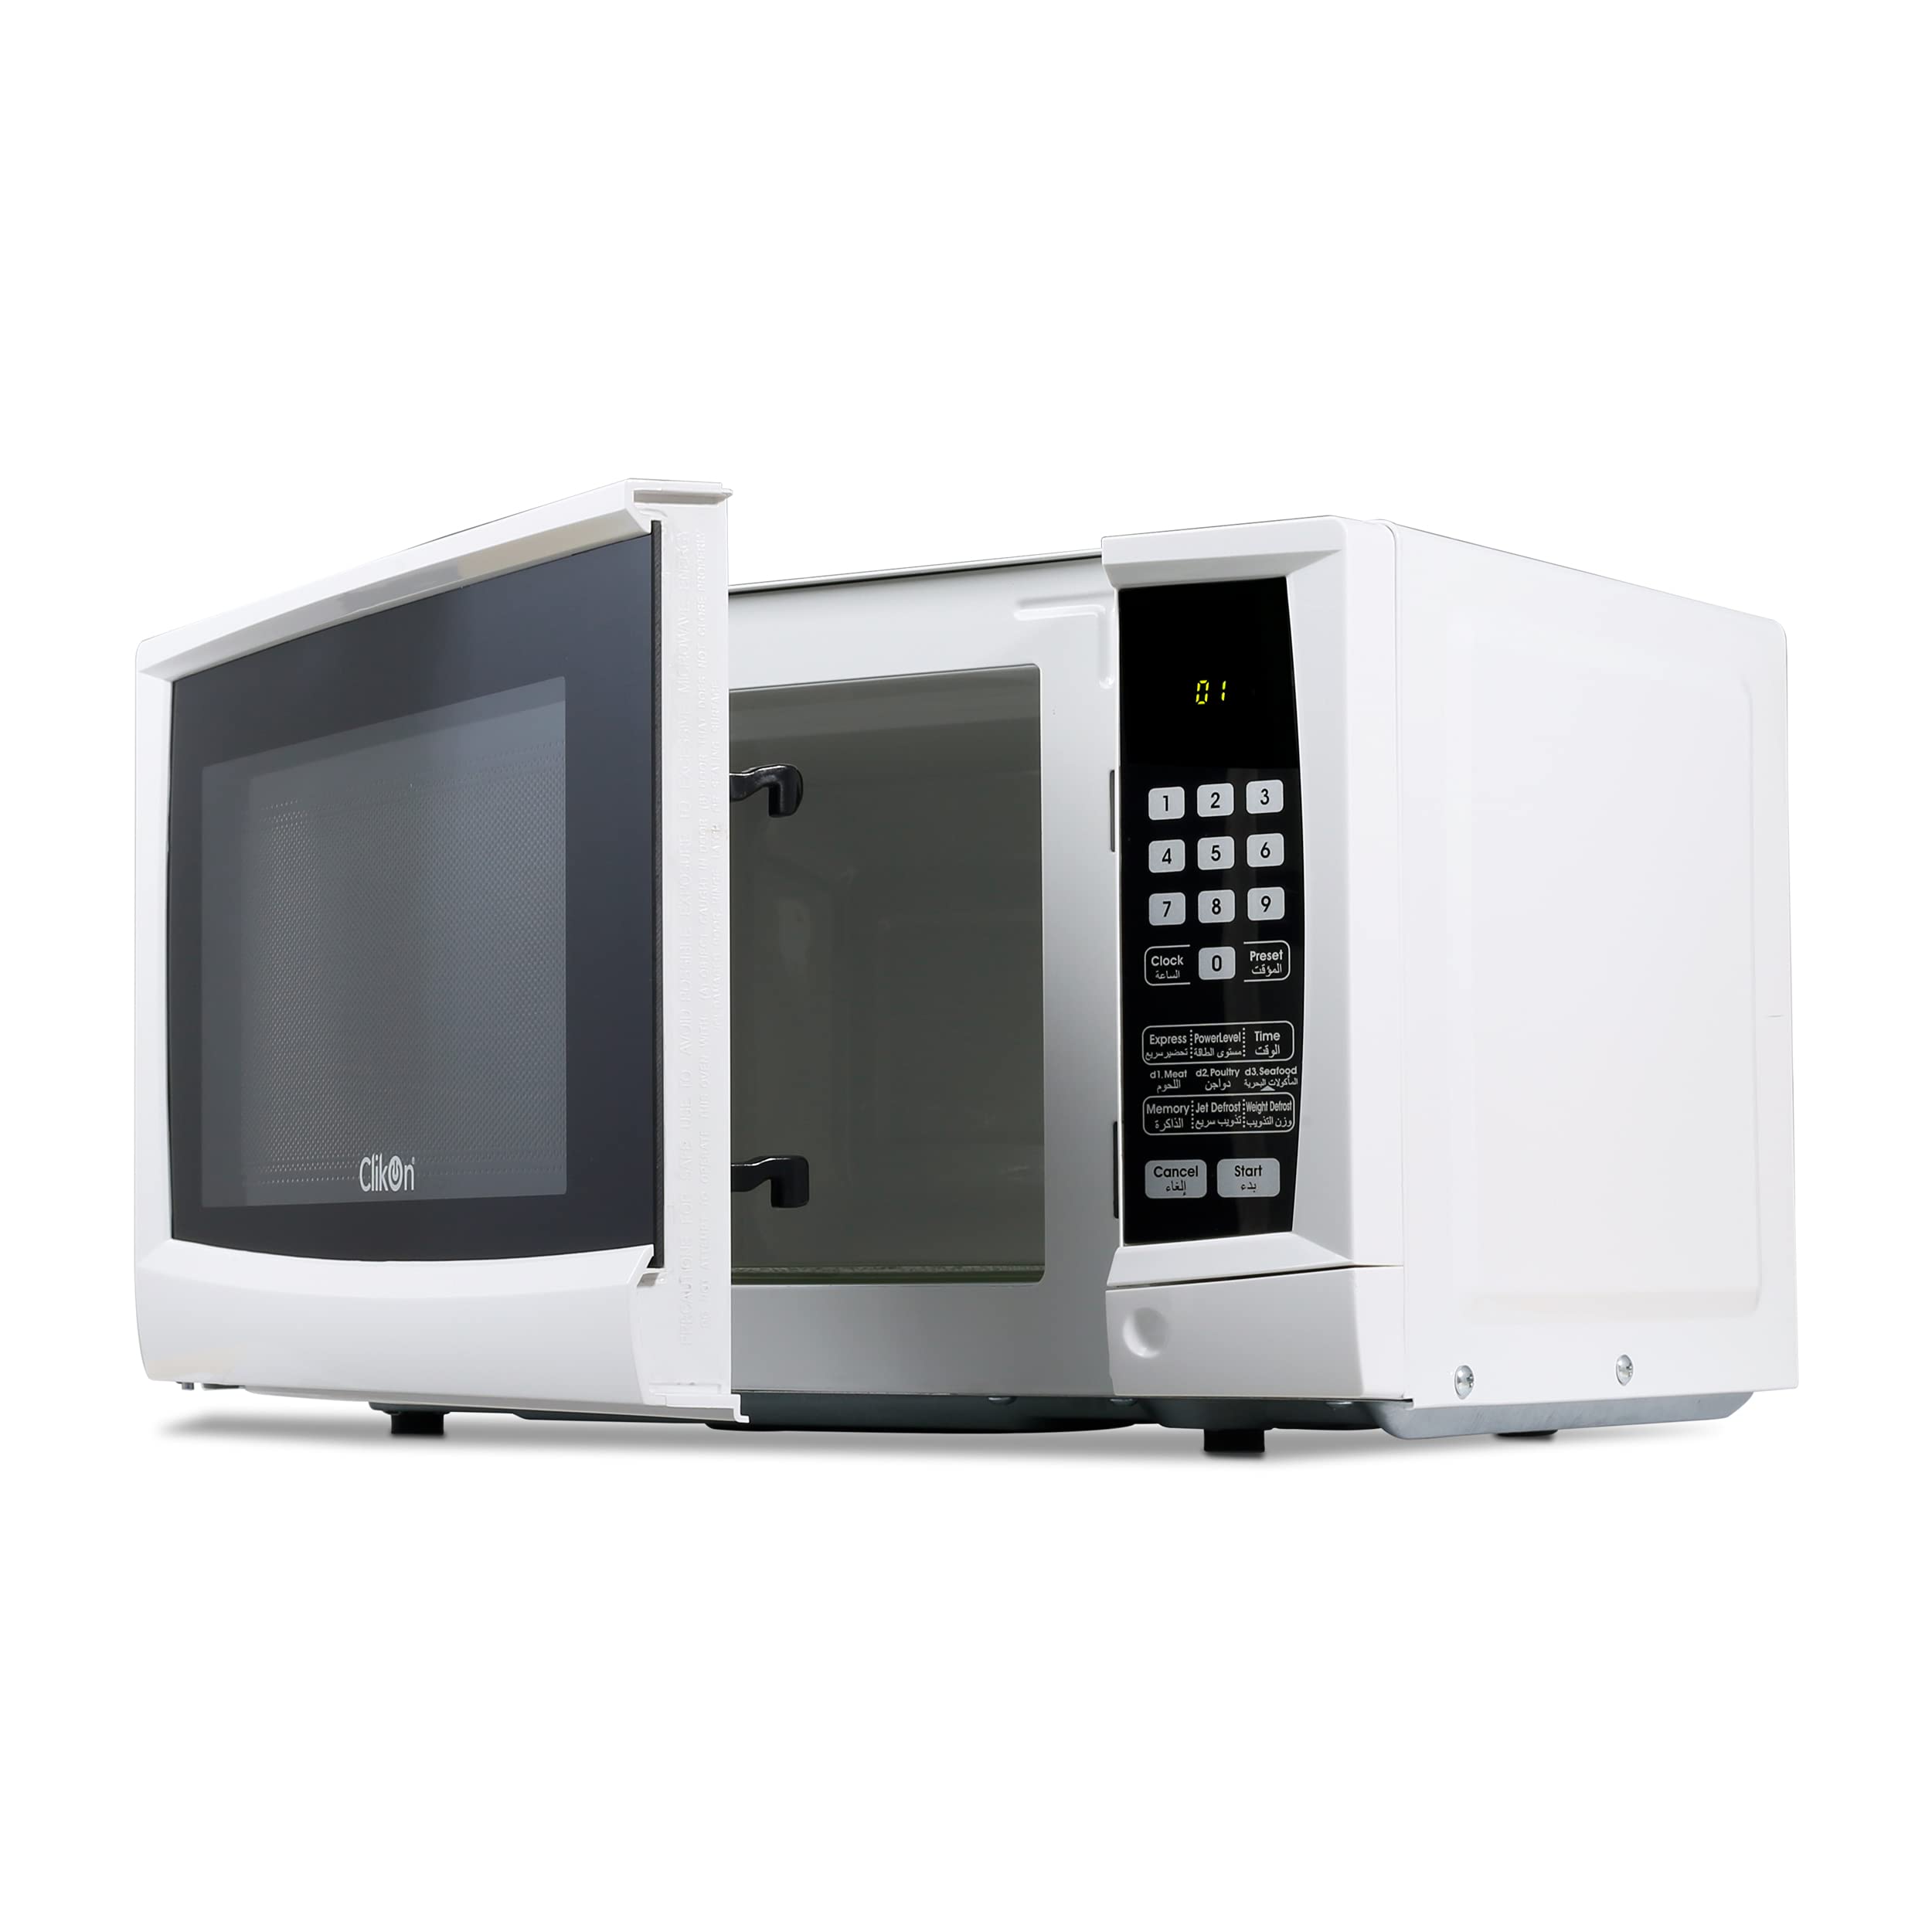 Clikon 20 Liter Digital Microwave with Push Button Control| Model No CK4317-CK4319-CK4320 with 2 Years Warranty